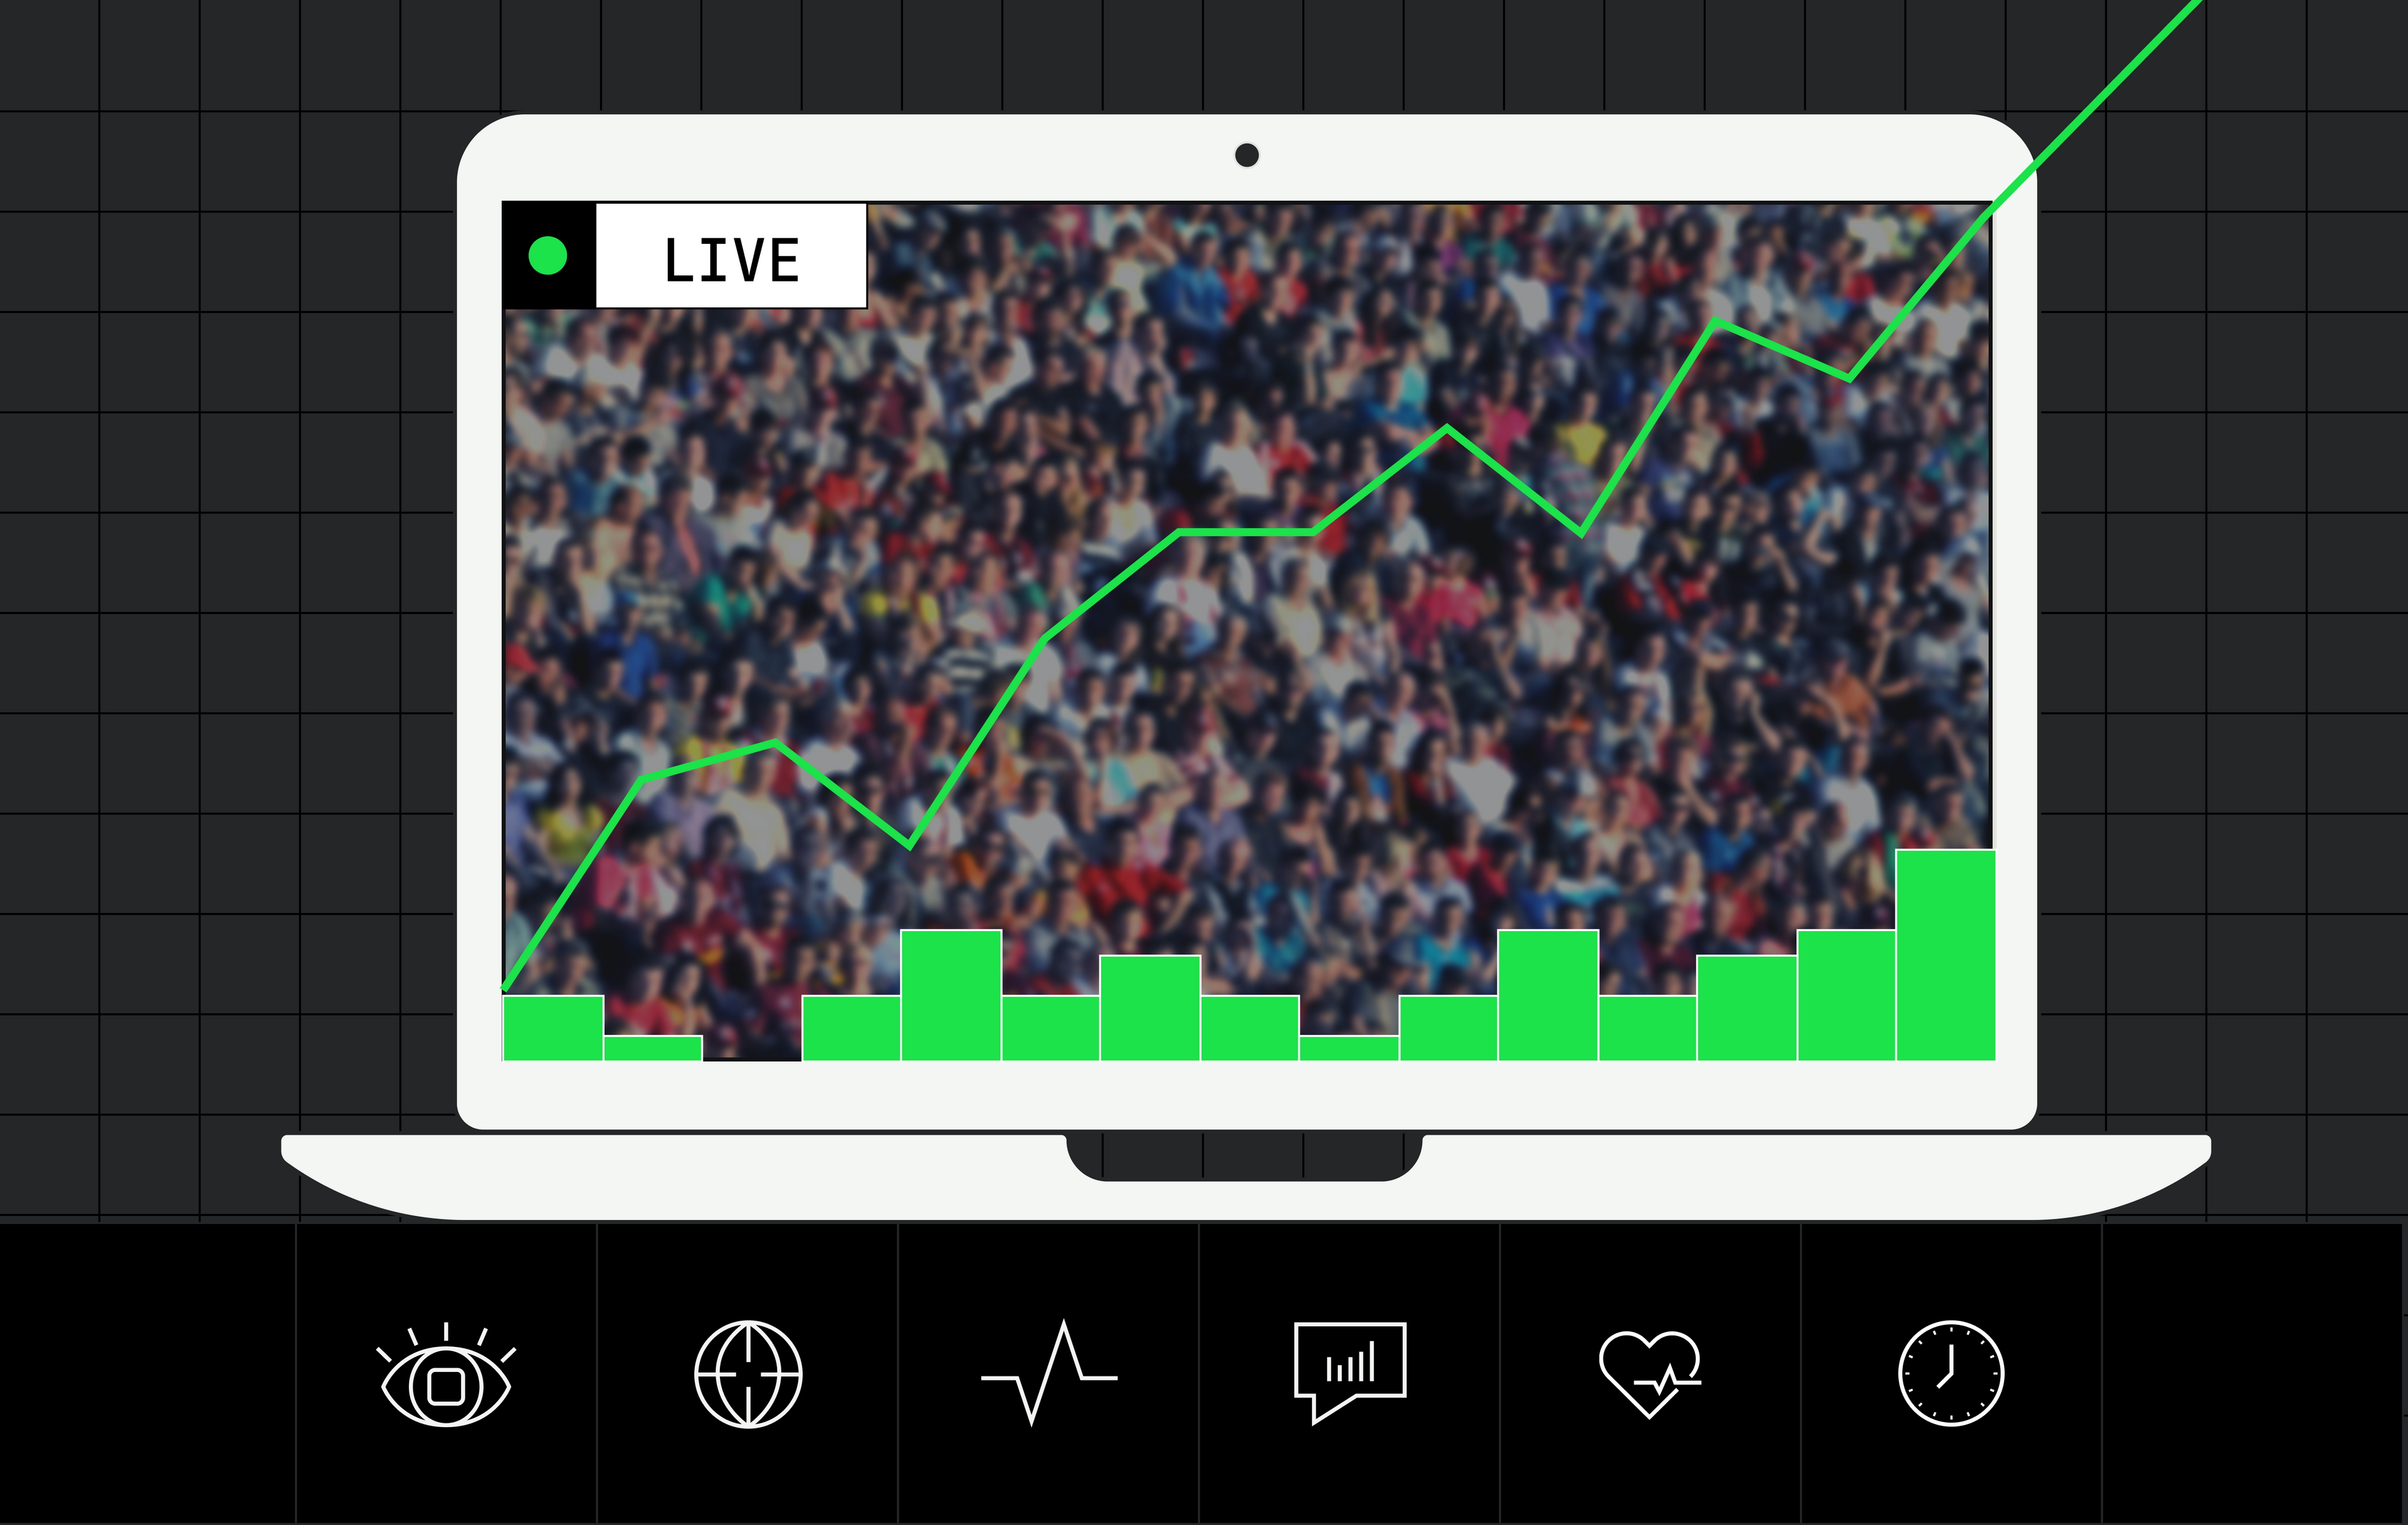 A graphic design showing a large crowd on a laptop screen with a green chart overlaid on top.